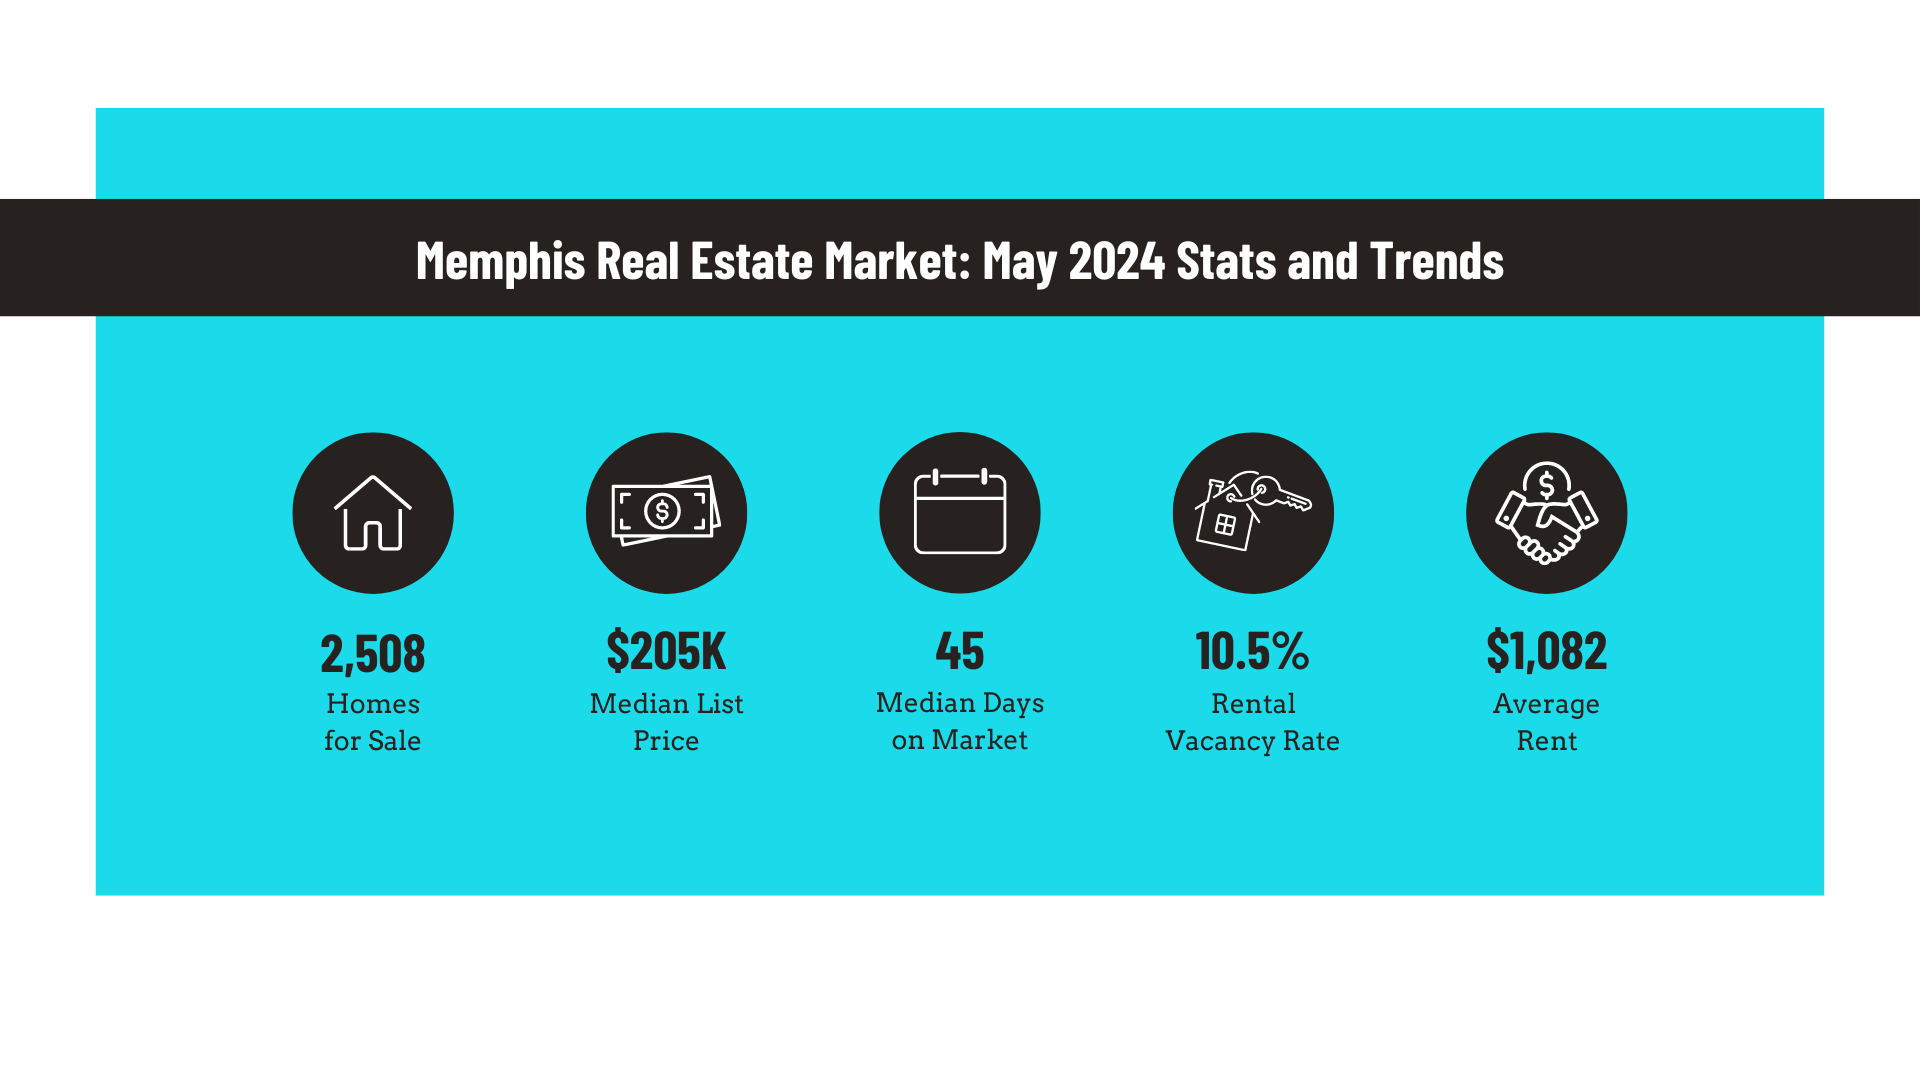 Memphis Real Estate Market (May 2024) Trends